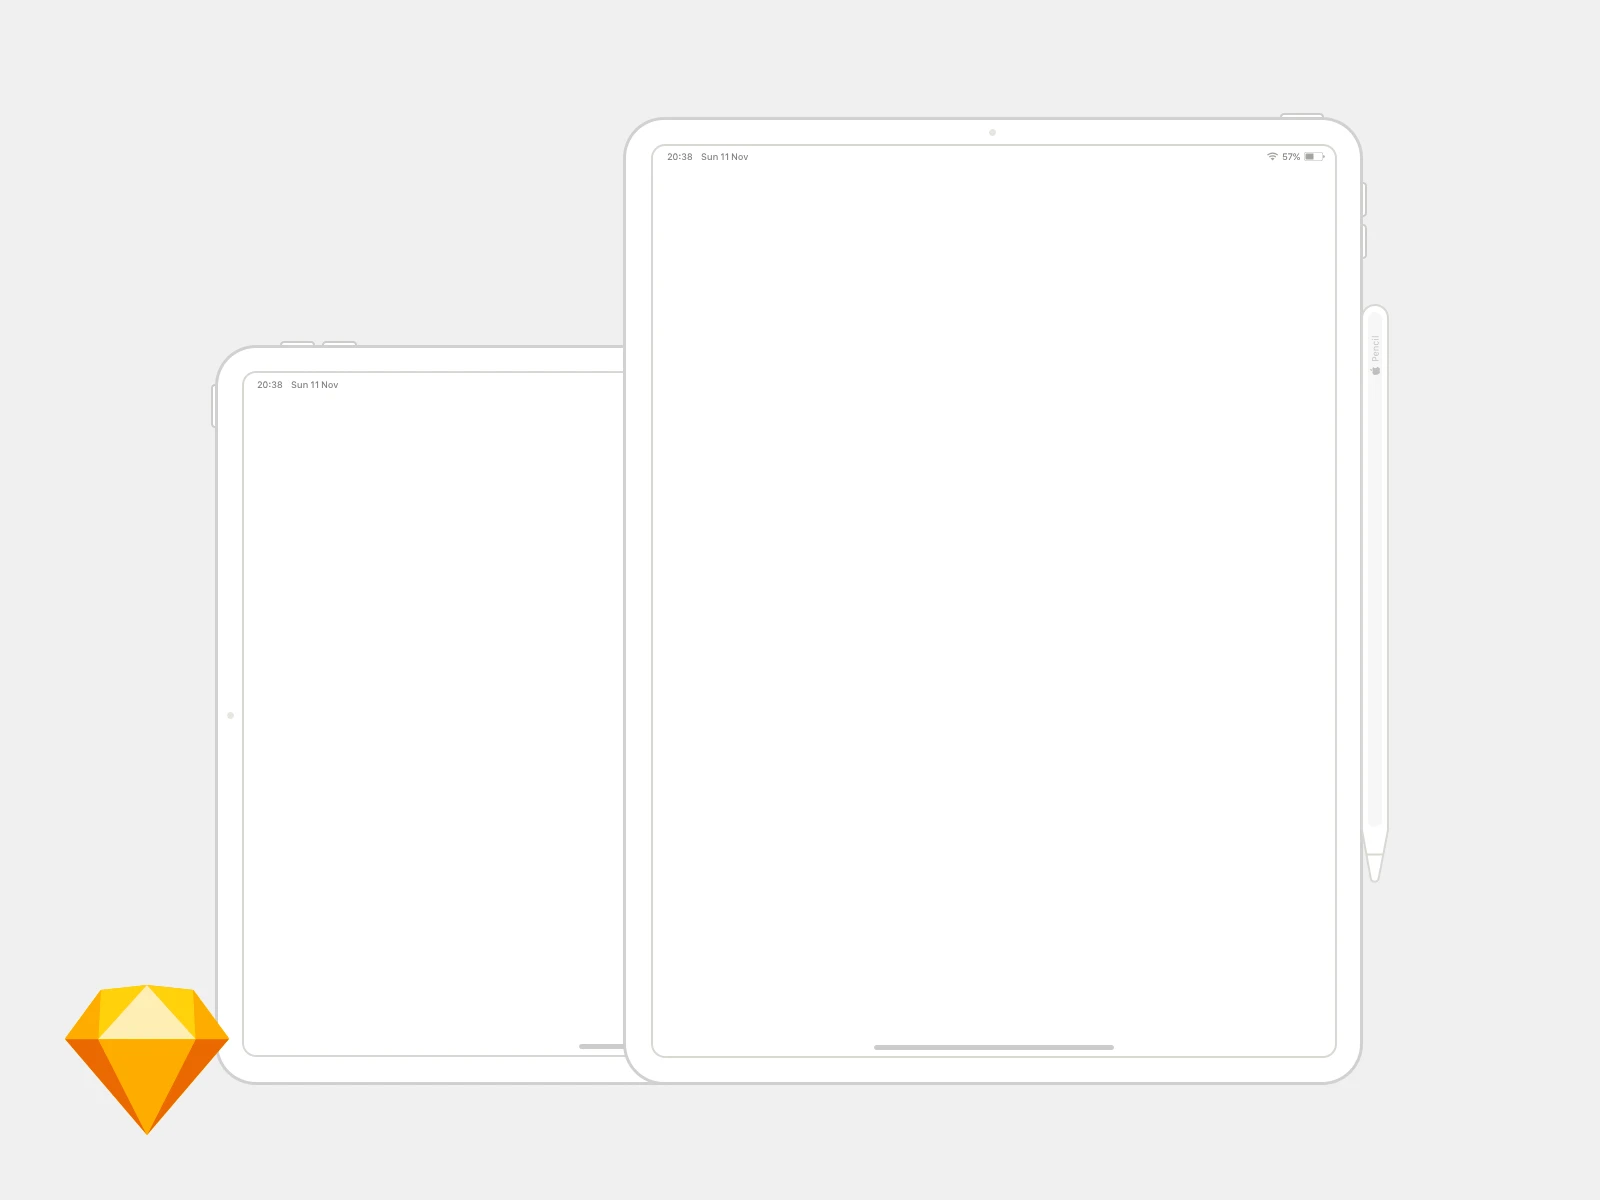 iPad Pro 12.9 Wireframe Mockup - It's an 12.9 inch model at 1/3 of the original pixel resolution for a smoother transition to real pixels. Includes an Apple Pencil. Available in landscape and portrait. Its all symbols so you can configure it however you'd like.